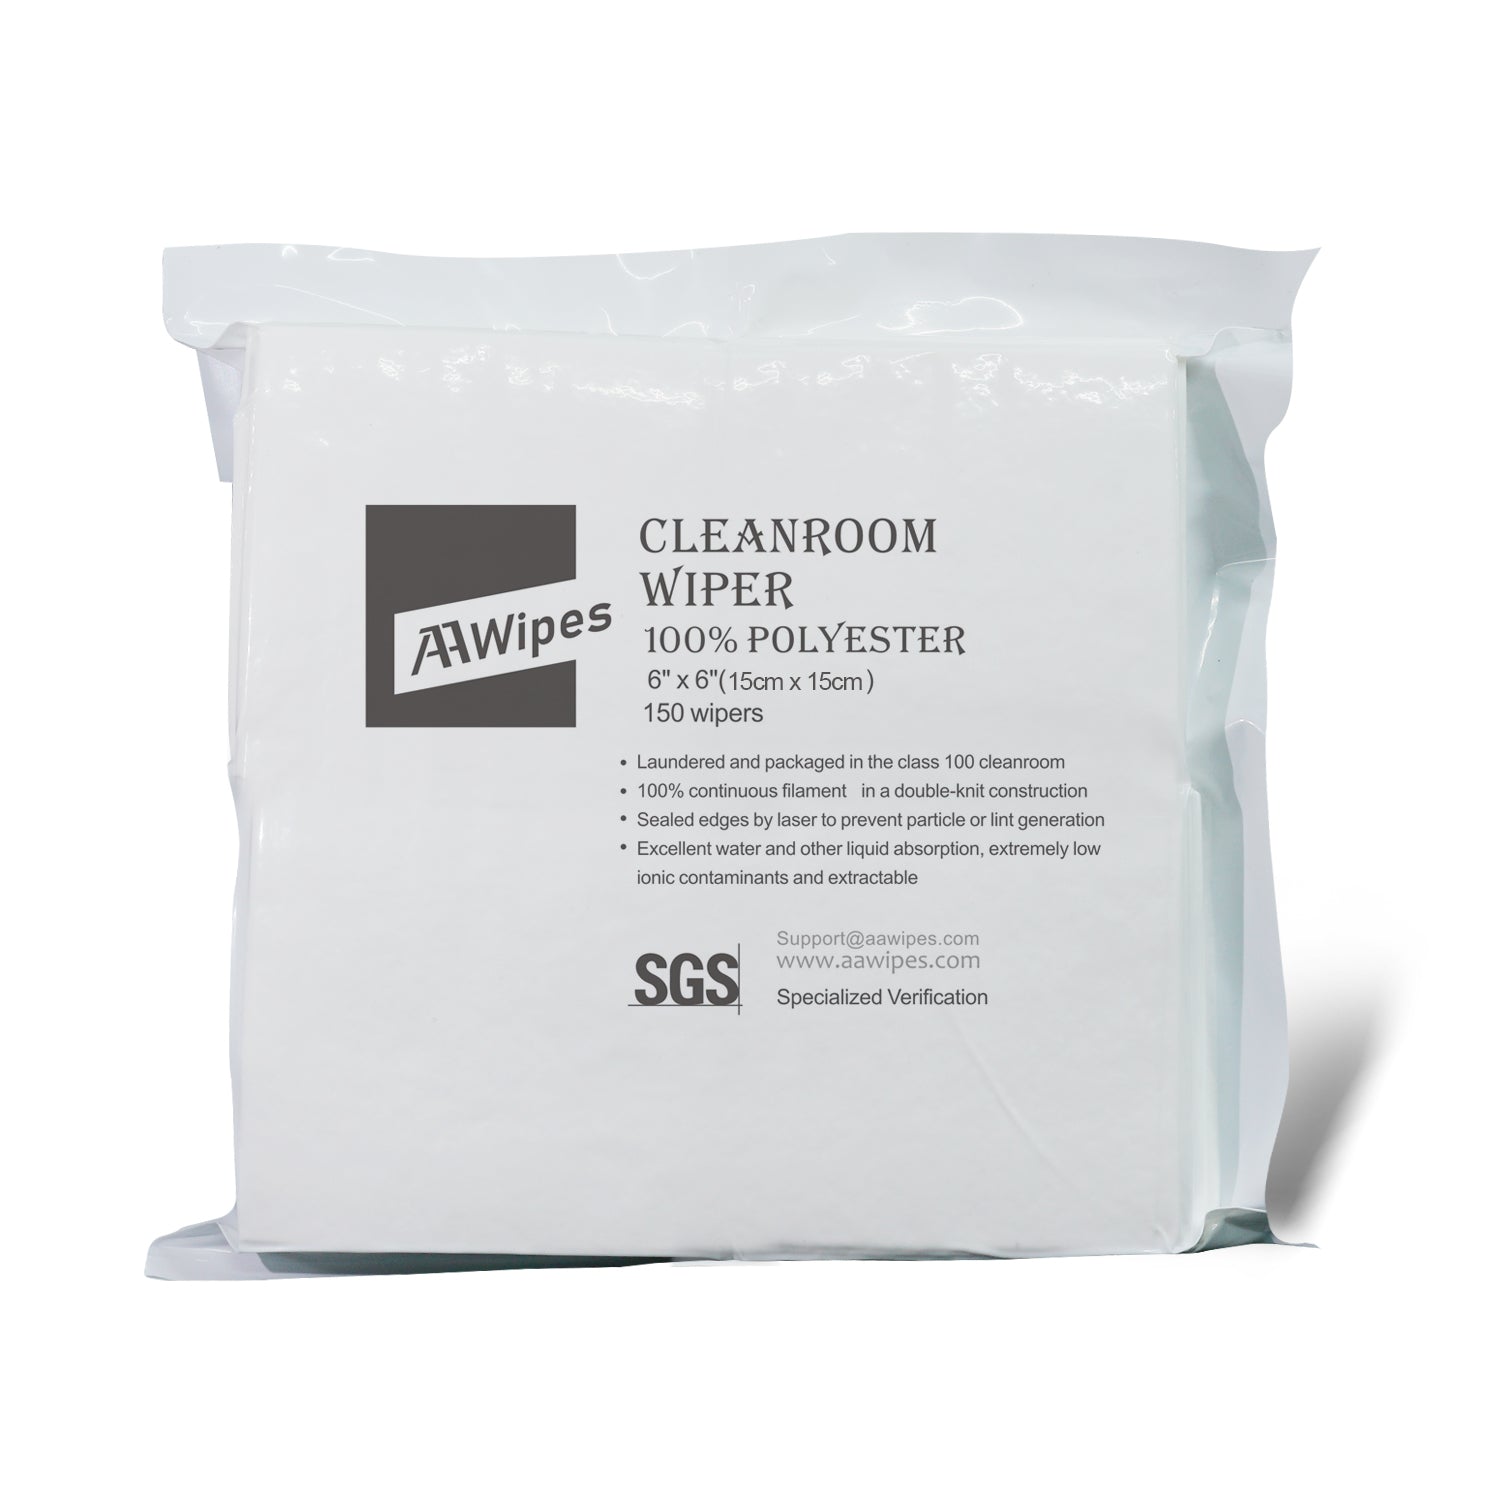 Biotech Lab Cleanroom Wipes 6"x6" Double Knit 100% Polyester Wipes Lint Free Cloths with Ultra-fine Filaments, Laser Sealed Edge, Class 100 Cloths, Ultra-Soft Wipes for Critical Pharmaceutical-grade Cleaning. 6,000 wipes/box, 40 bags (No. CP14006).